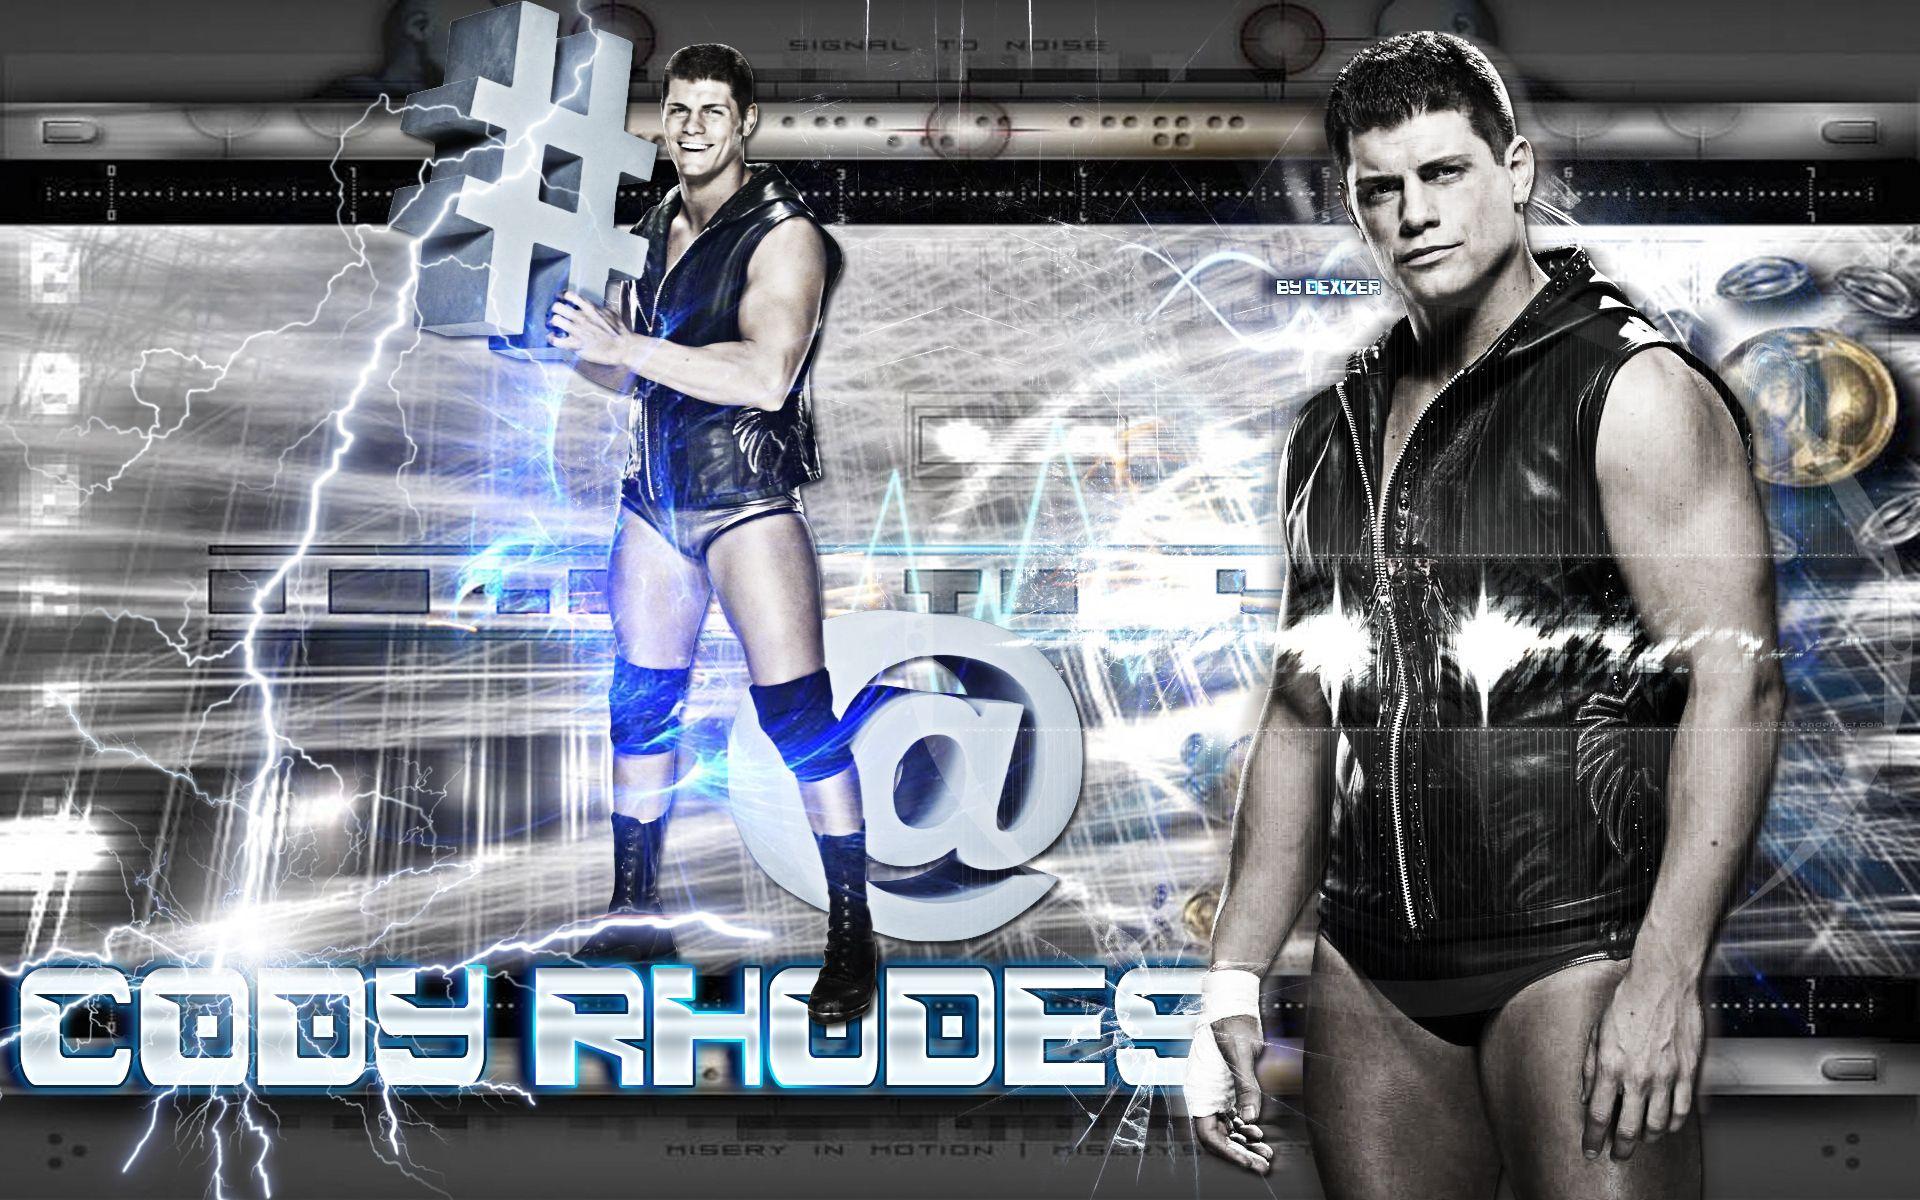 New Wwe Wallpapers 2014 Image.